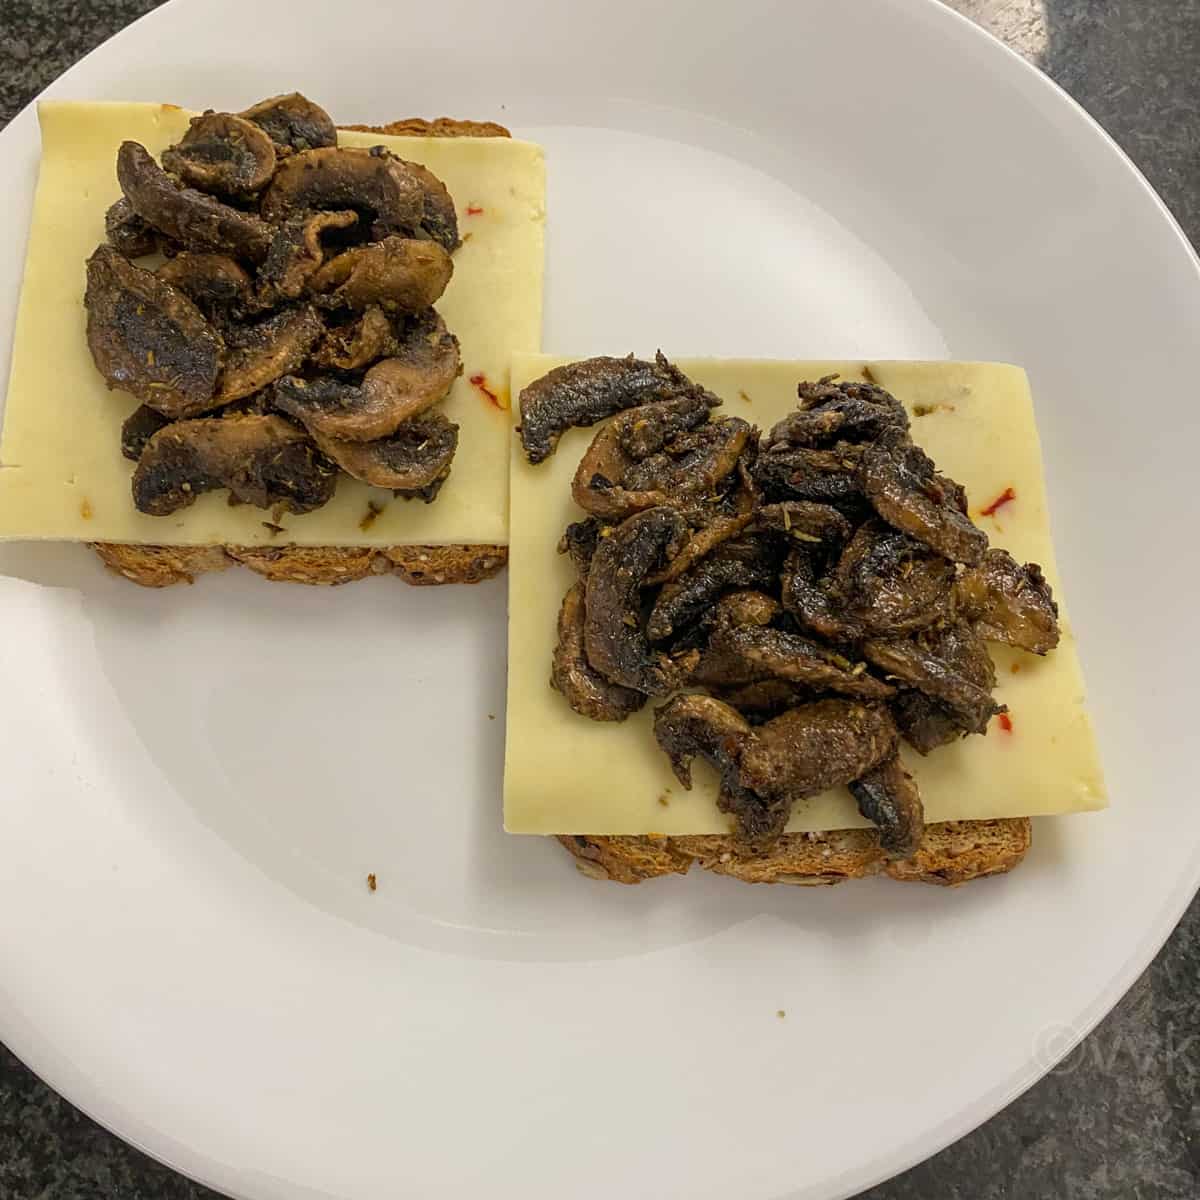 placing the sauteed mushrooms on top